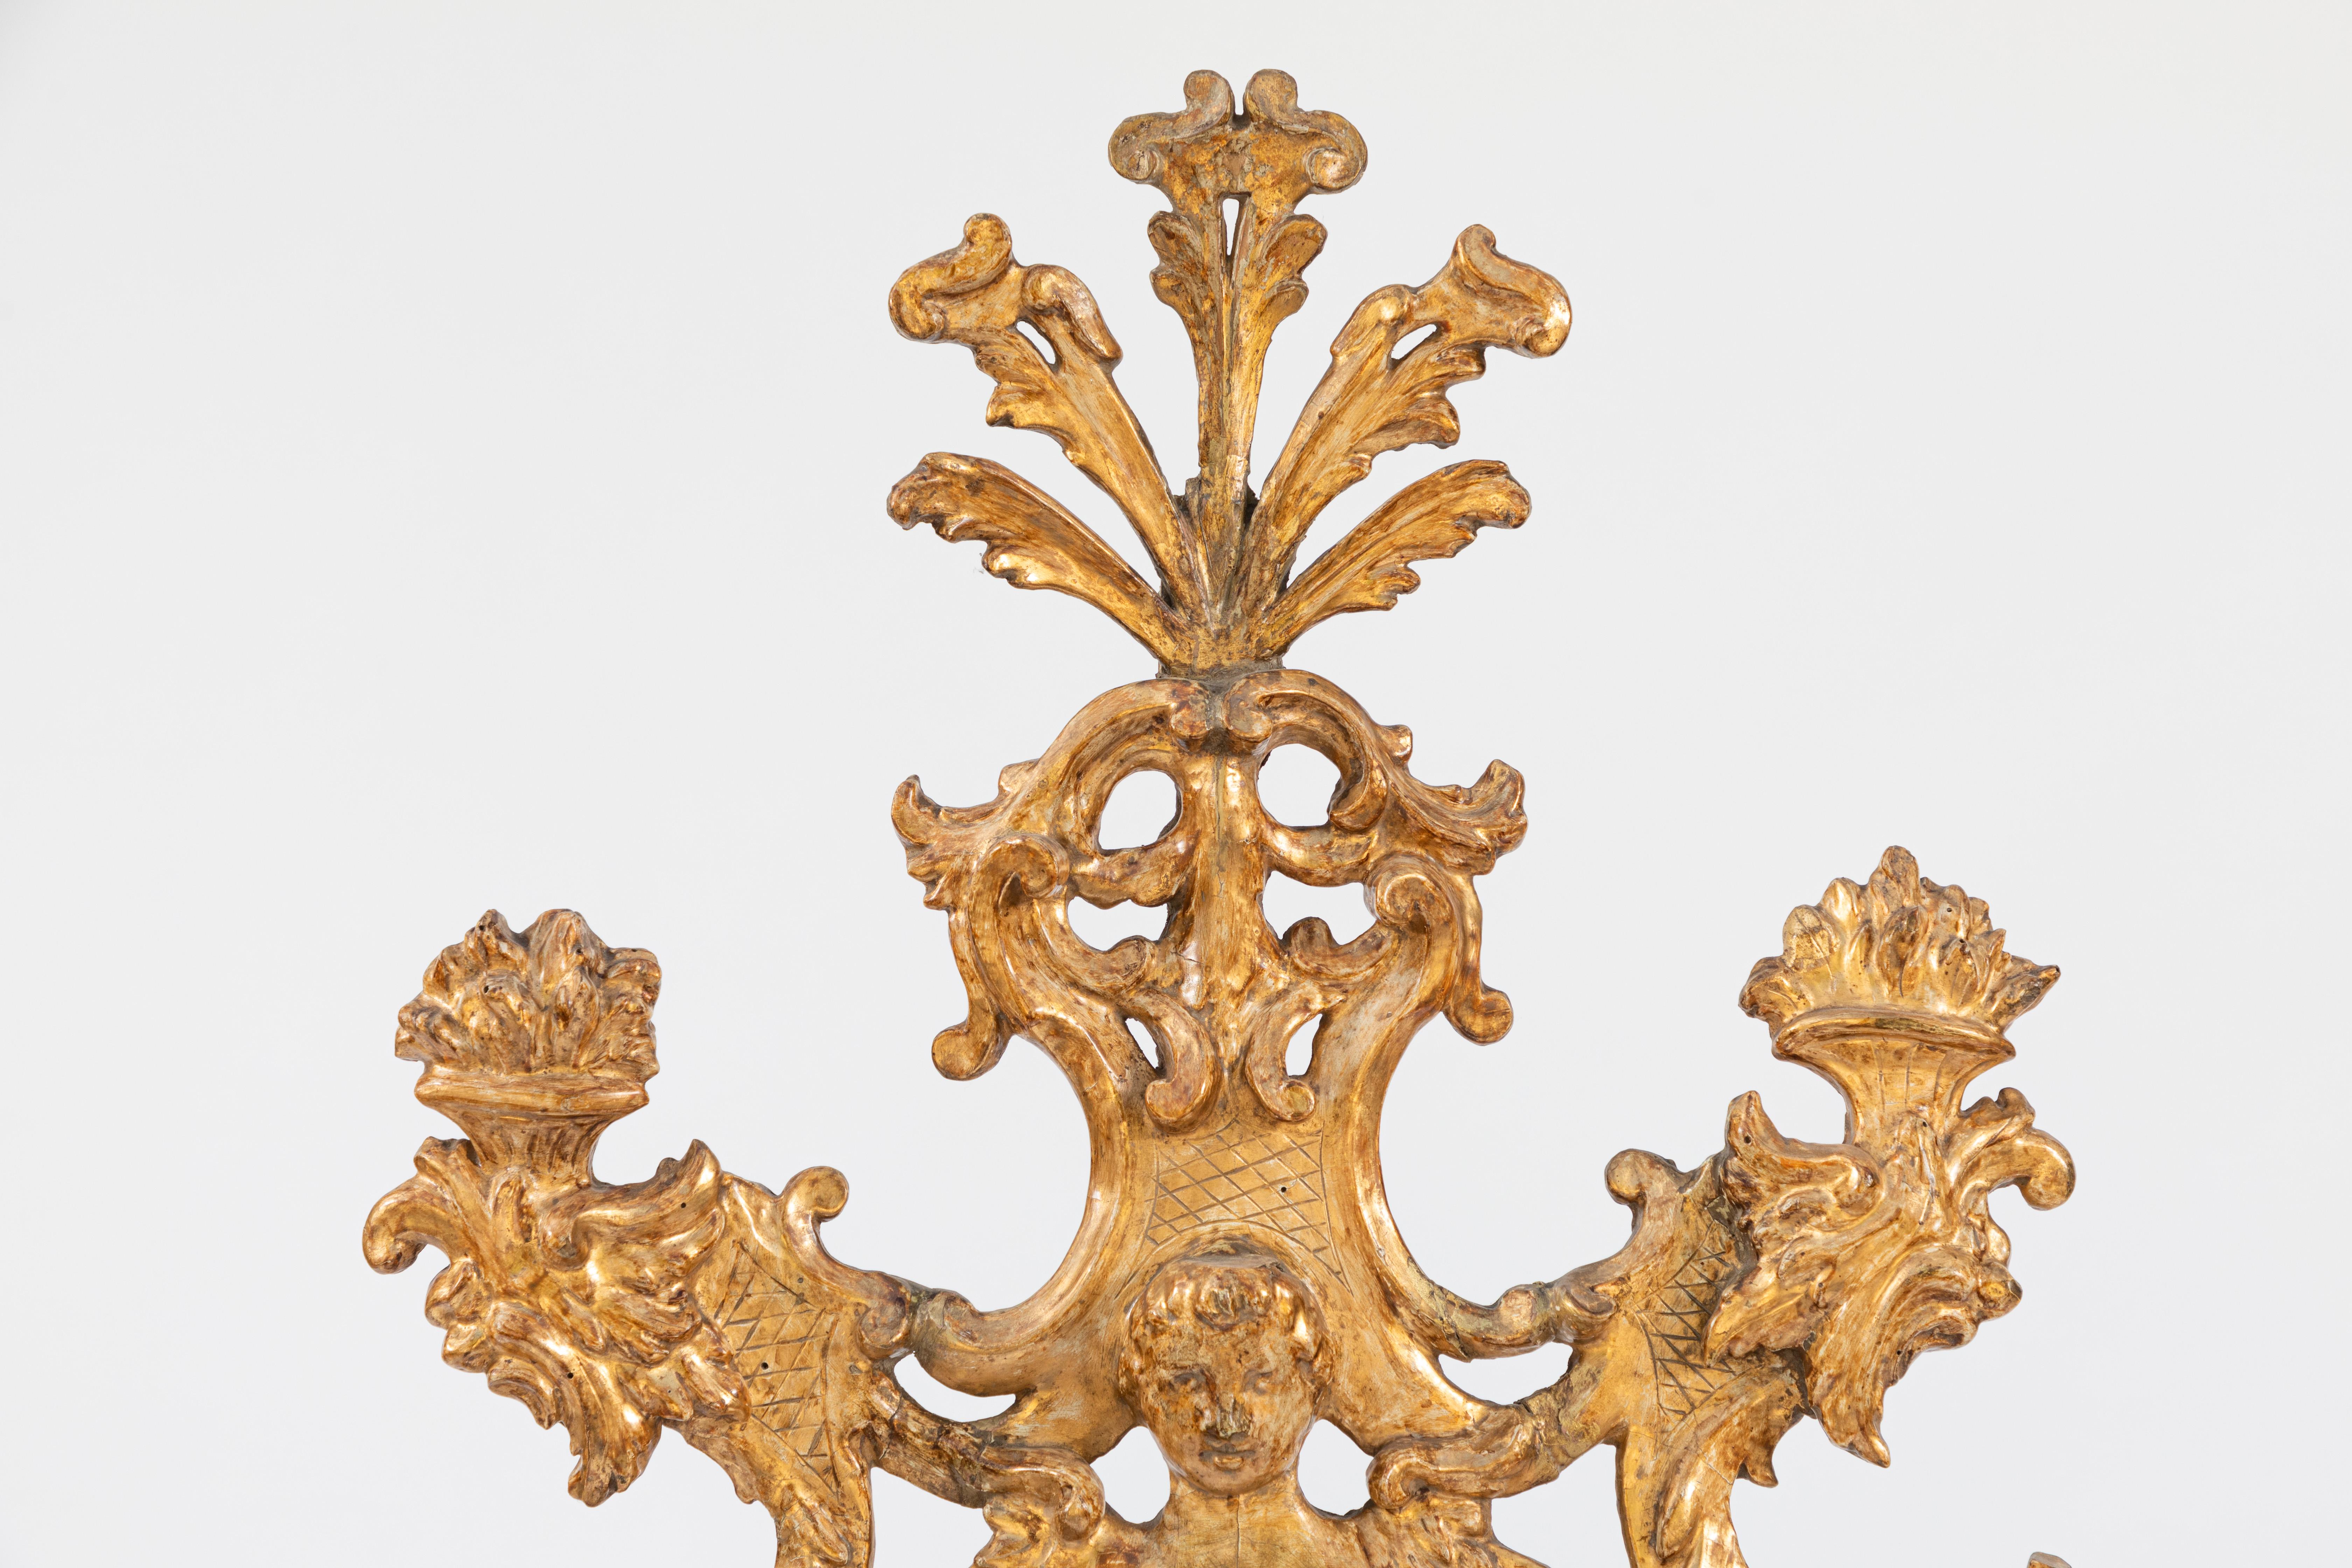 Very fine 18th century Venetian carved giltwood mirror with cherub and flower basket motif.